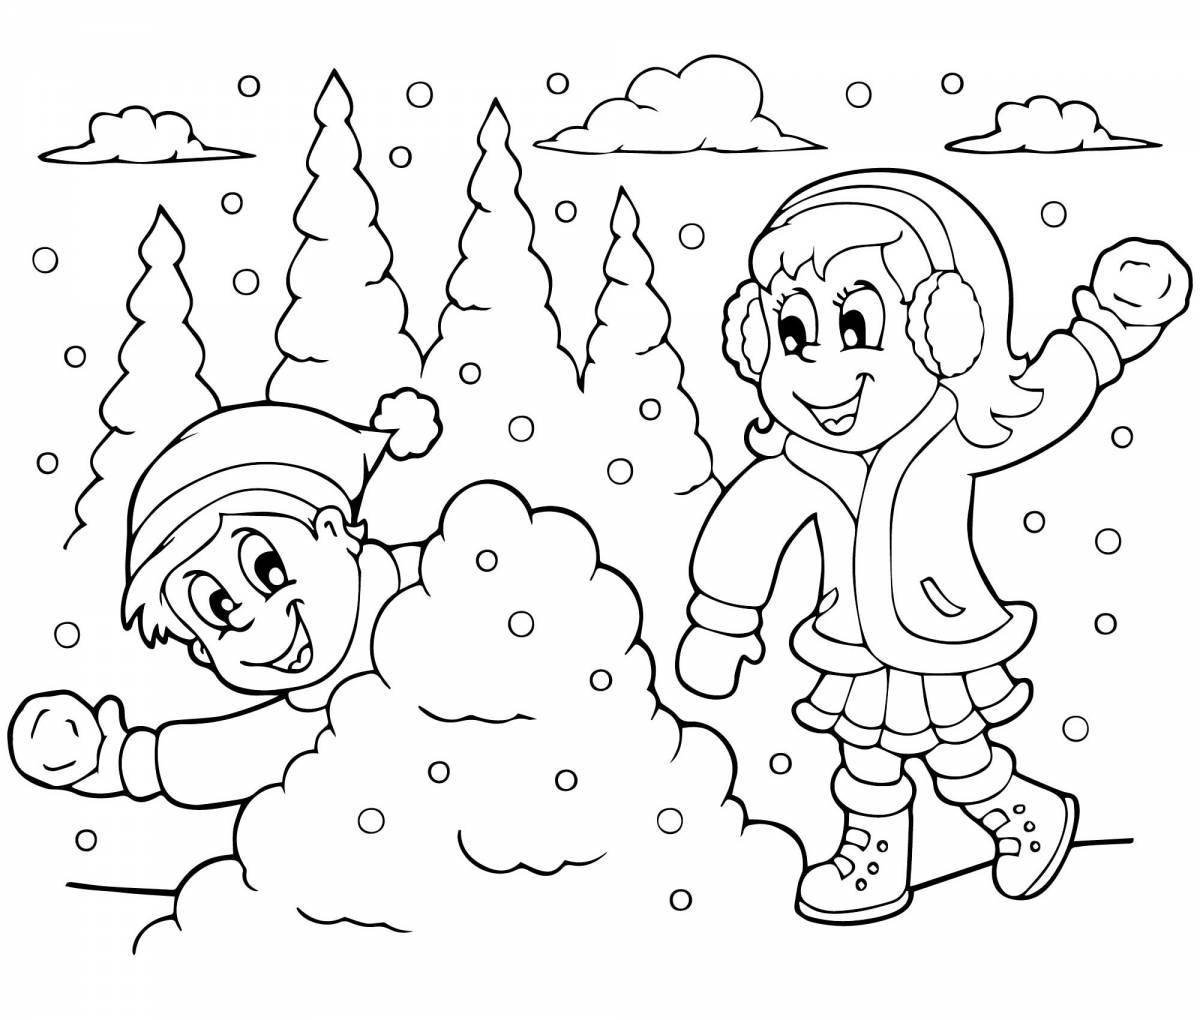 Coloring book stimulated snowball fight for kids